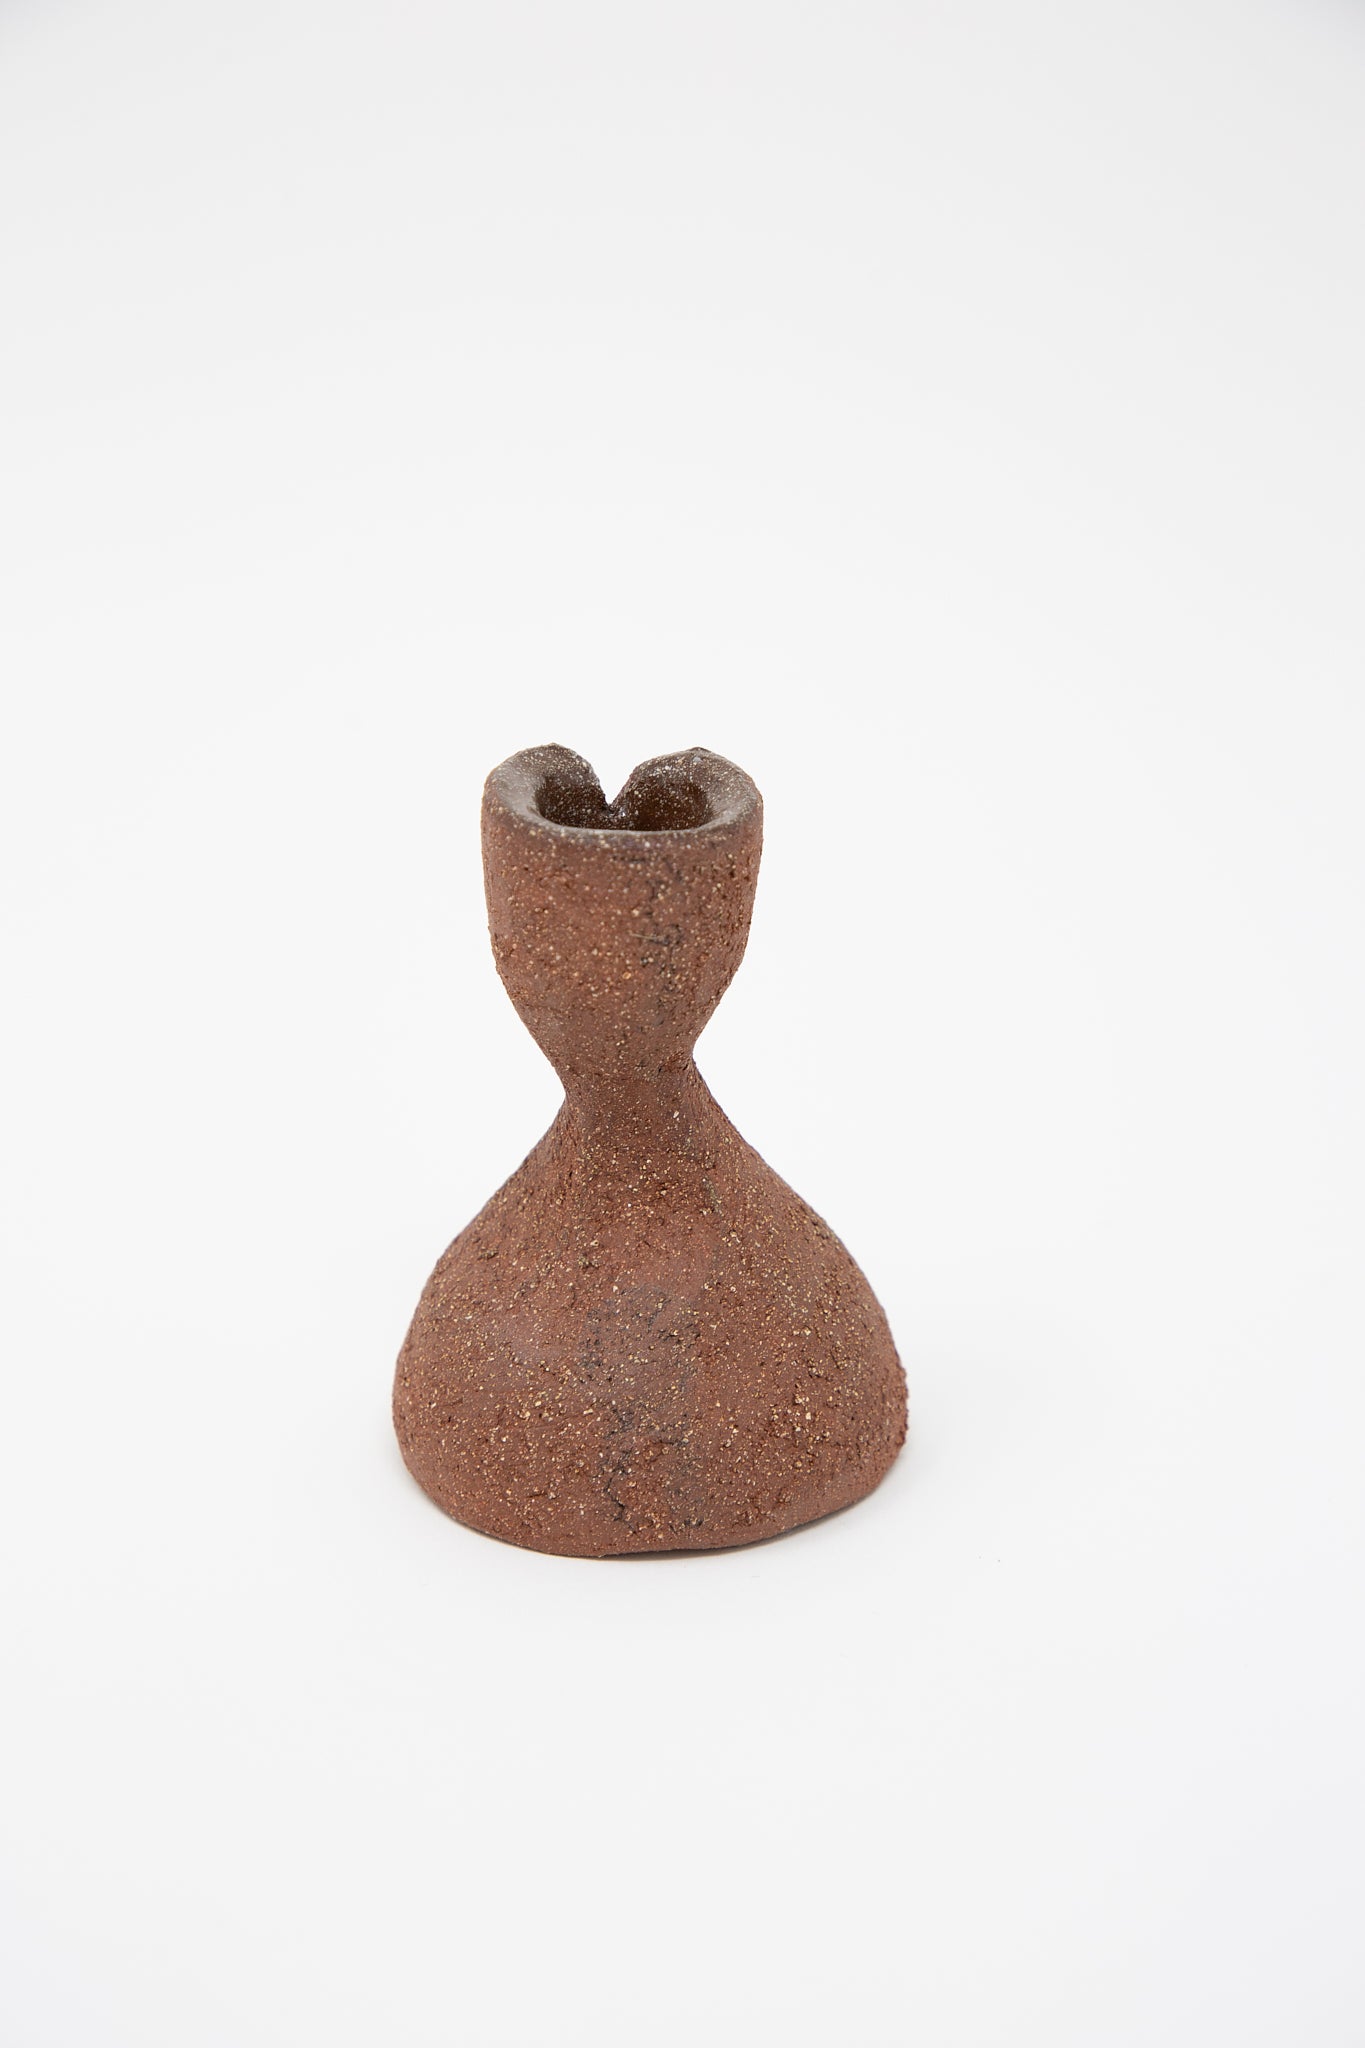 A small piece of Lost Quarry's Hand Built Candlesticks in Terracotta Sculpture Clay sitting on a white surface.